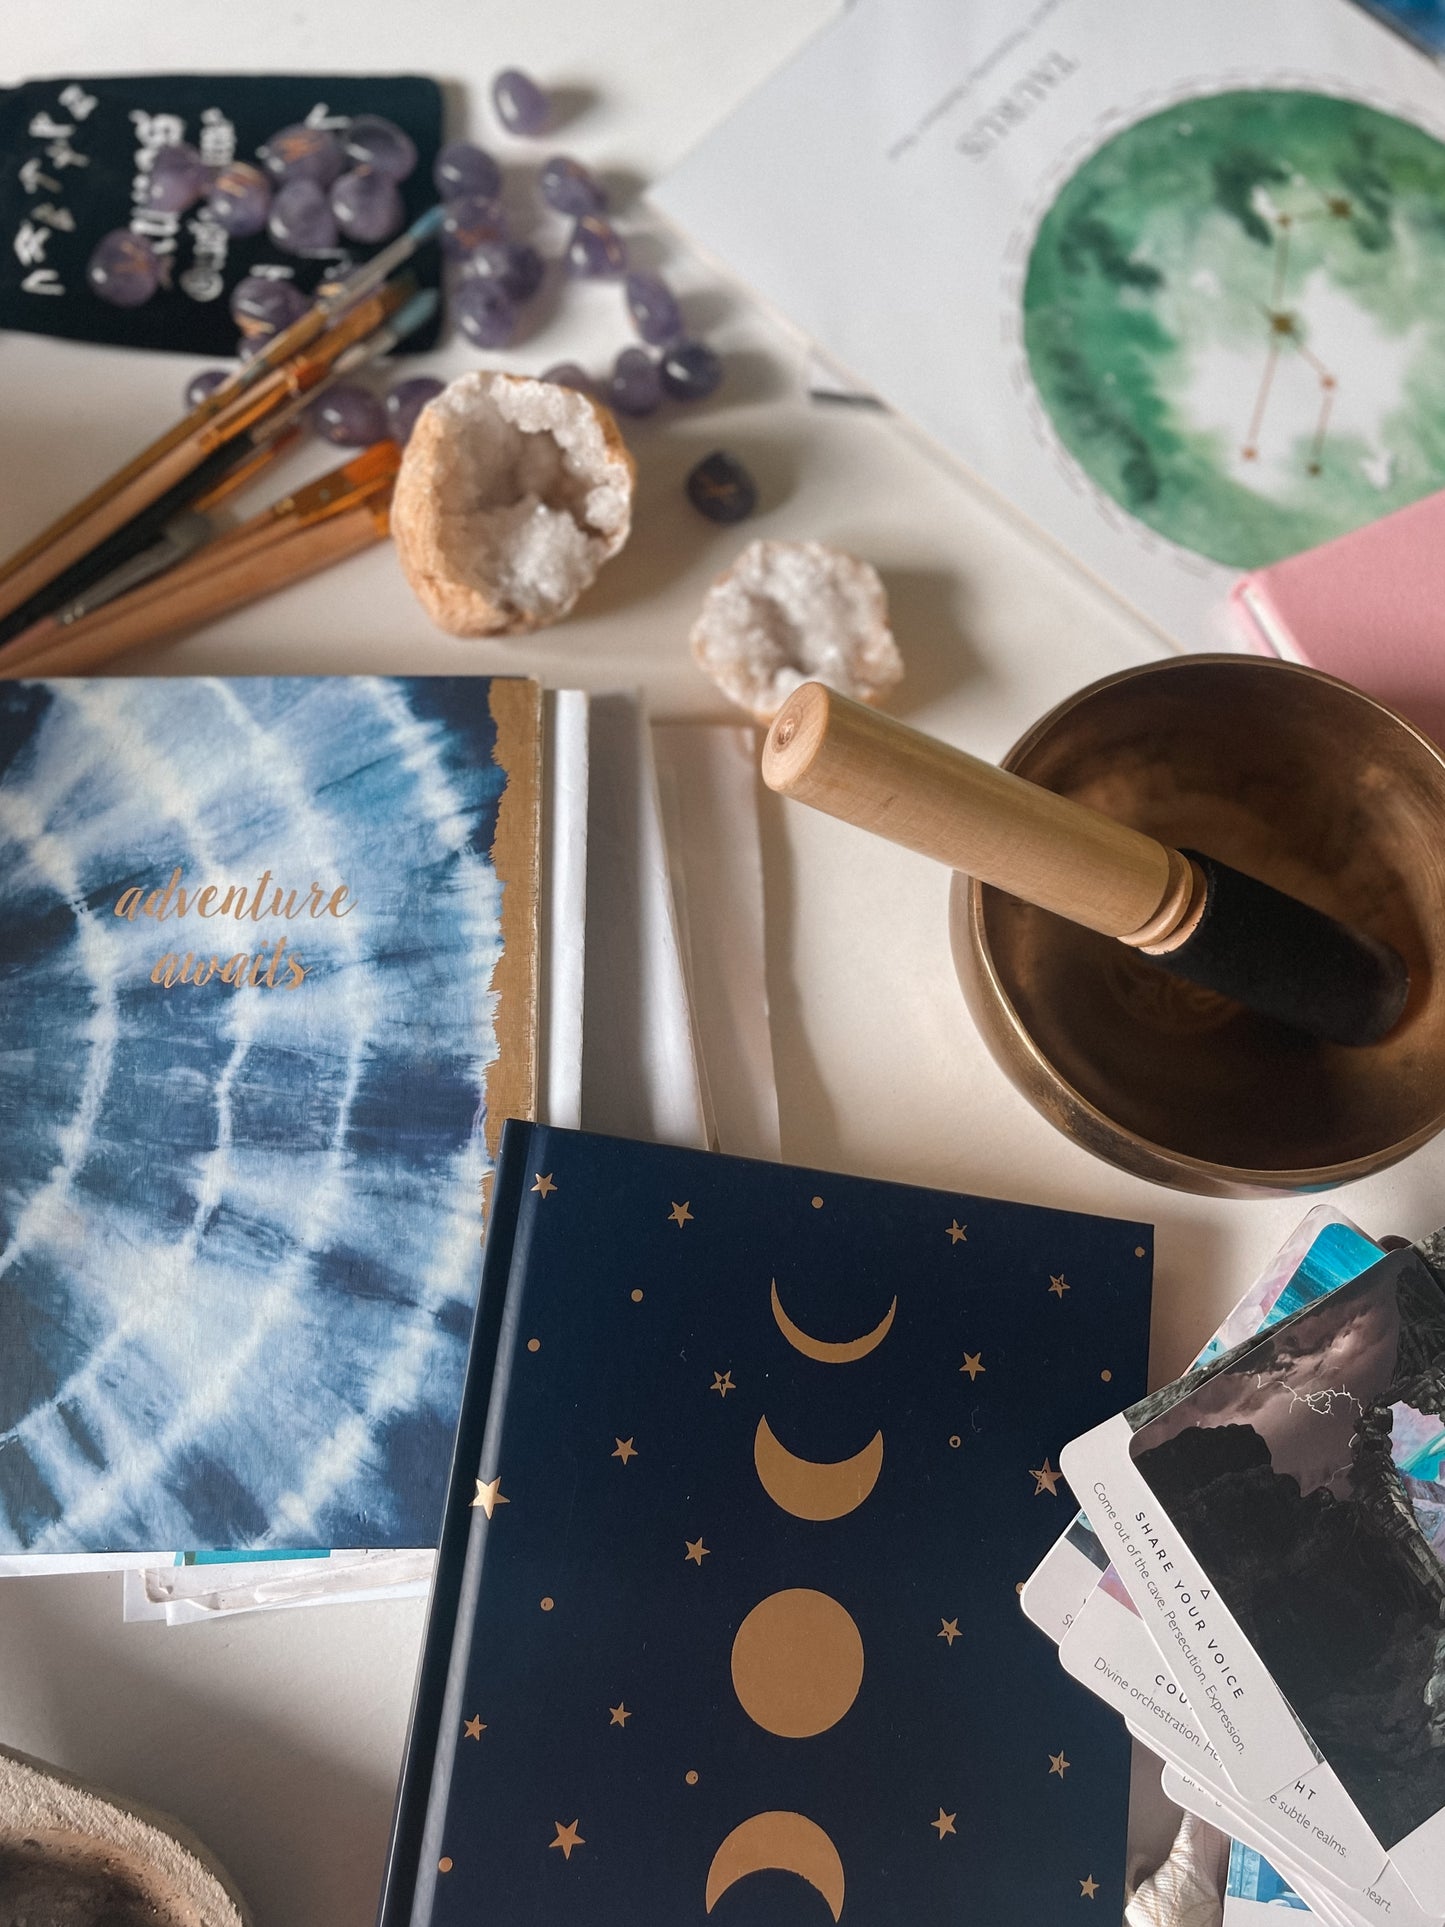 The Conscious Canvas Collective: Full Moon Edition